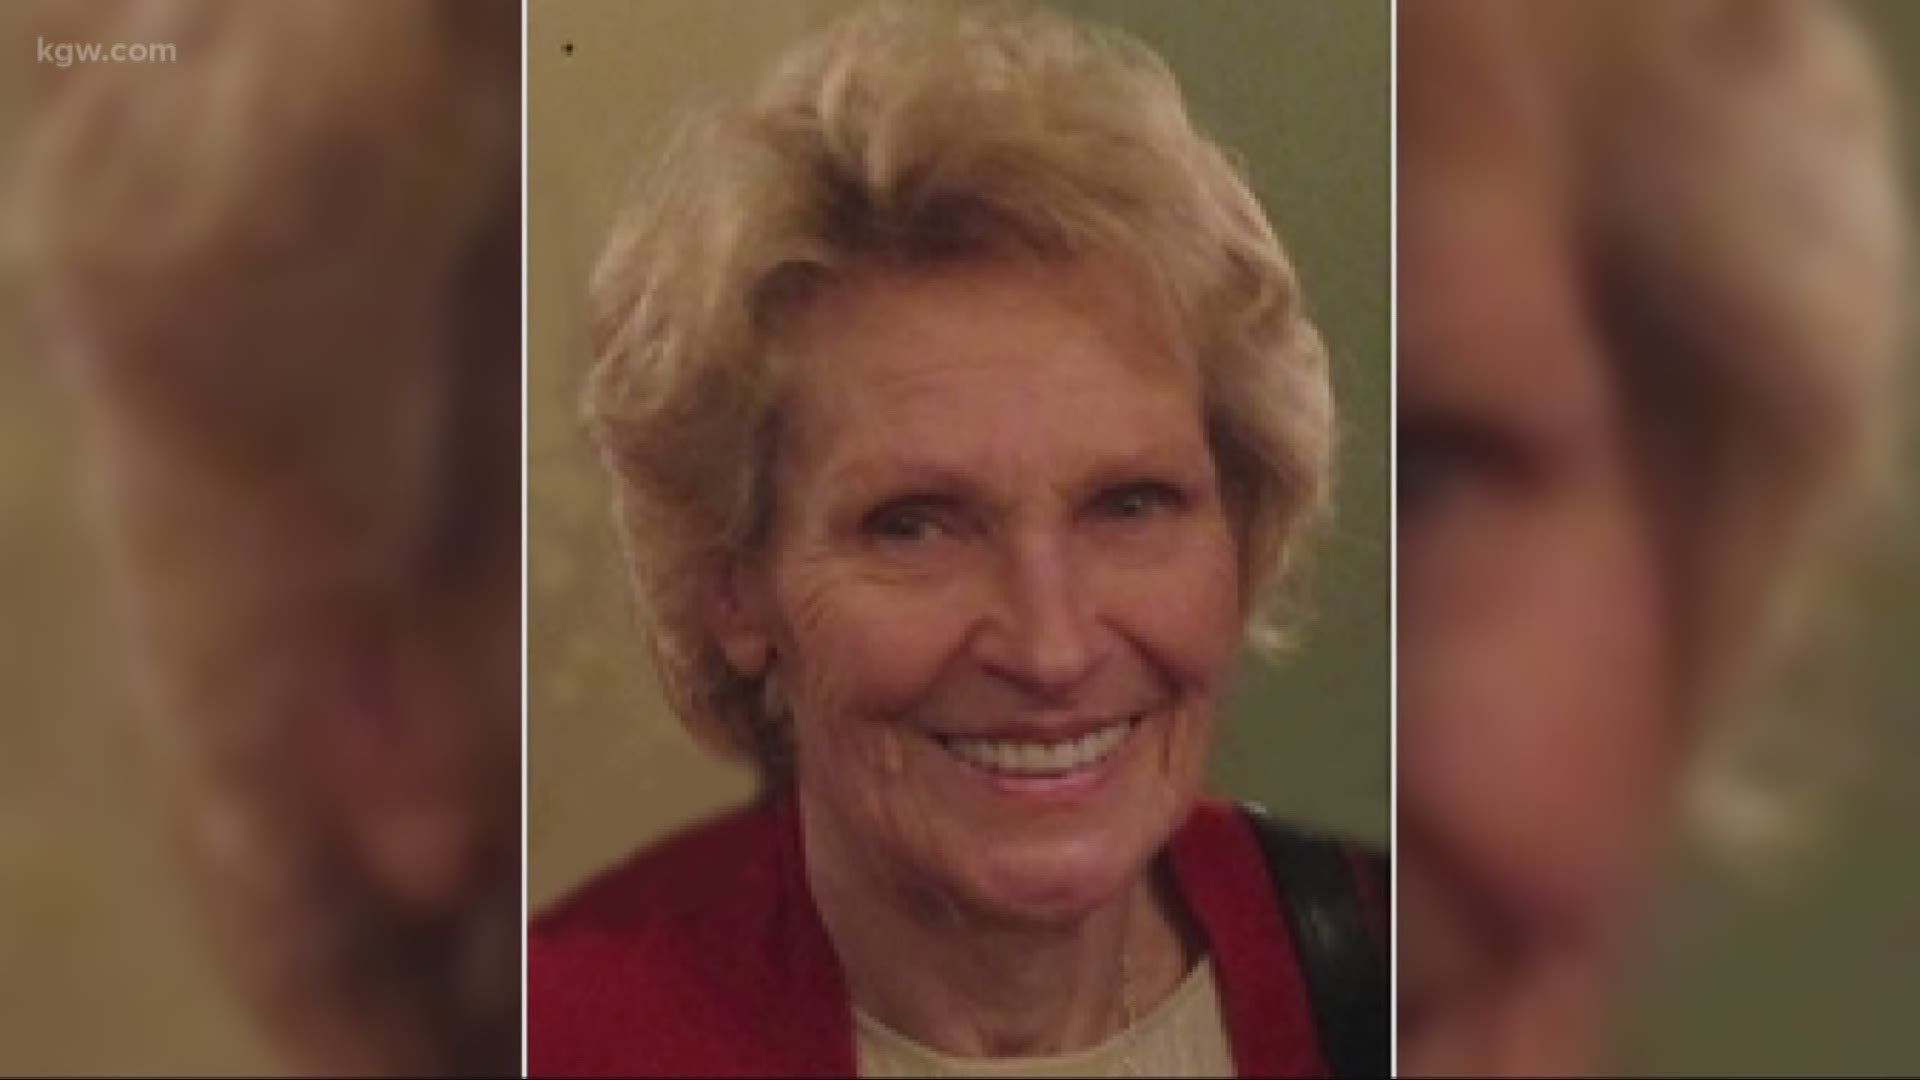 An 85-year-old woman was hit and killed in a hit-and-run crash in Southwest Portland on Tuesday